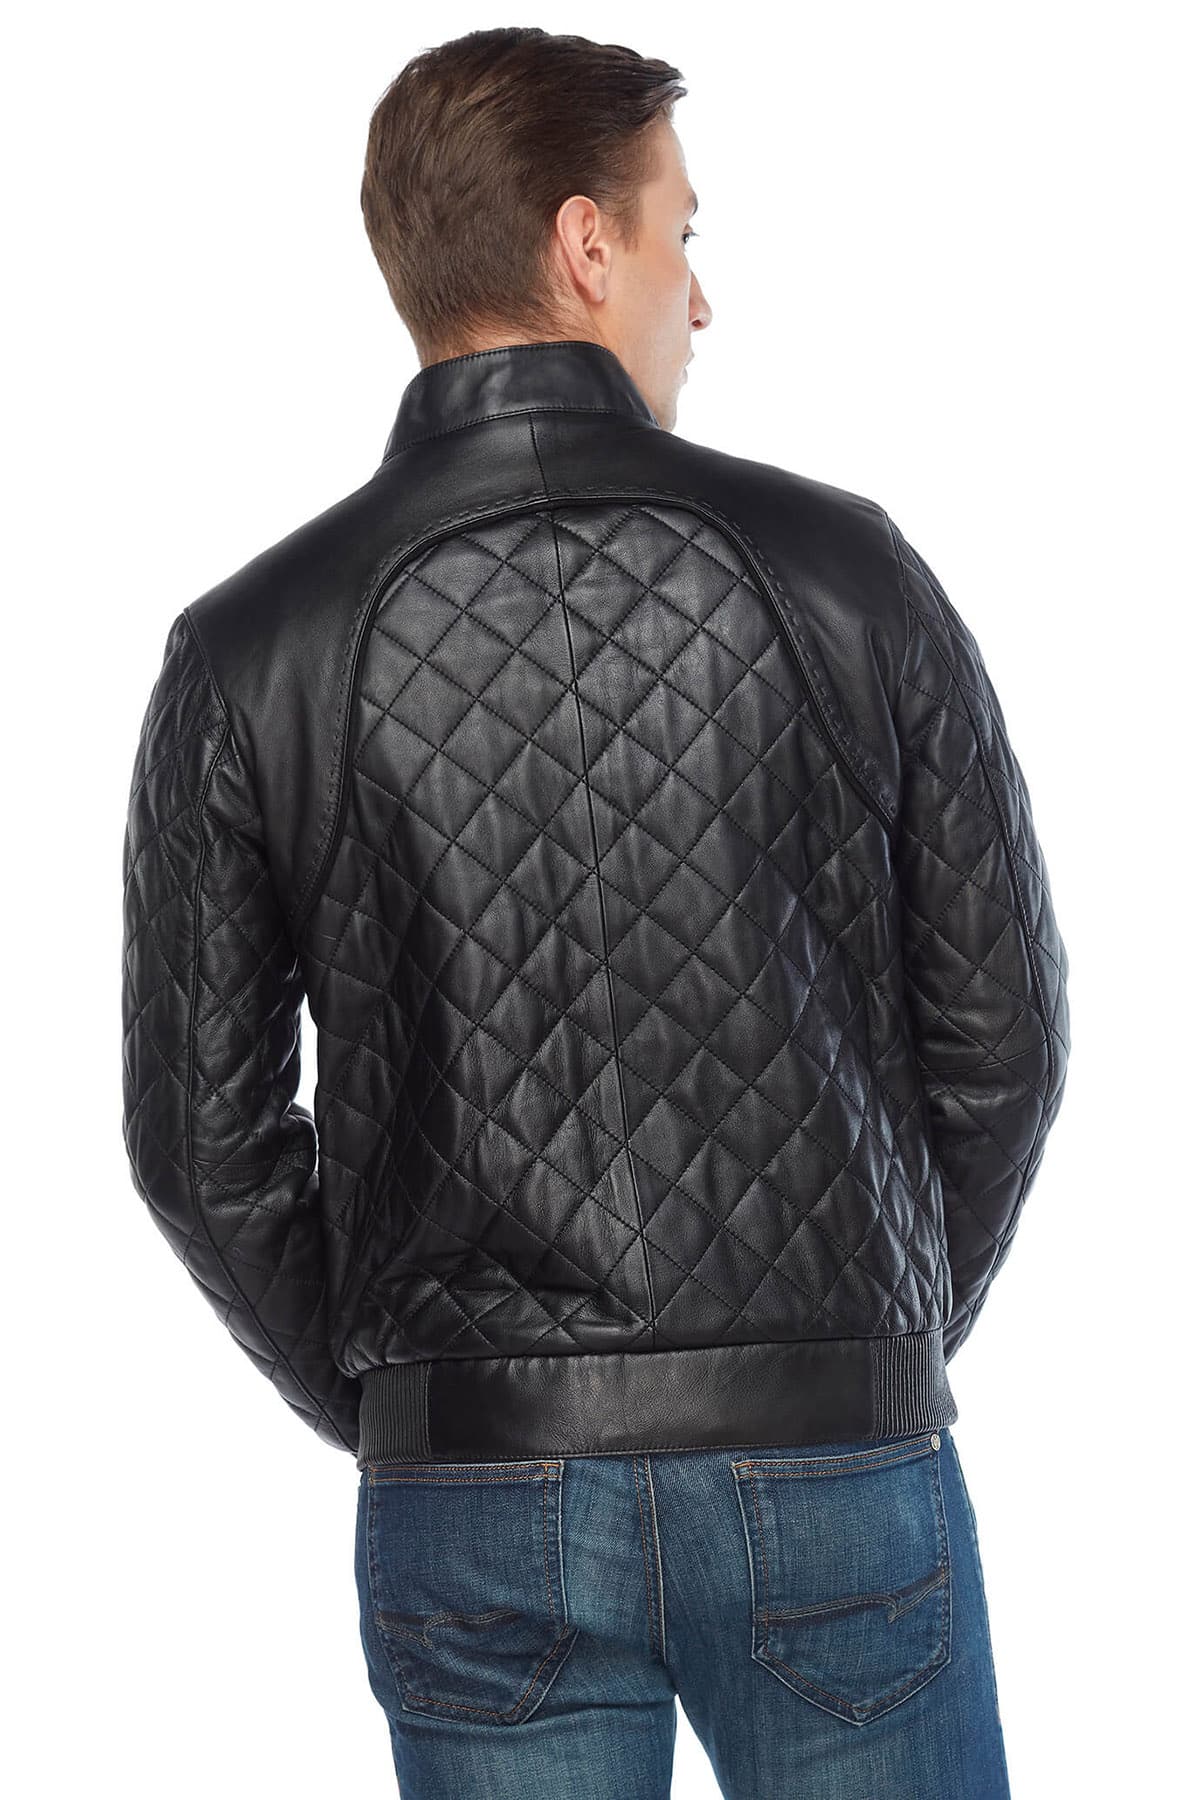 You've Searched for Mens Quilted Leather Bomber Jacket Black